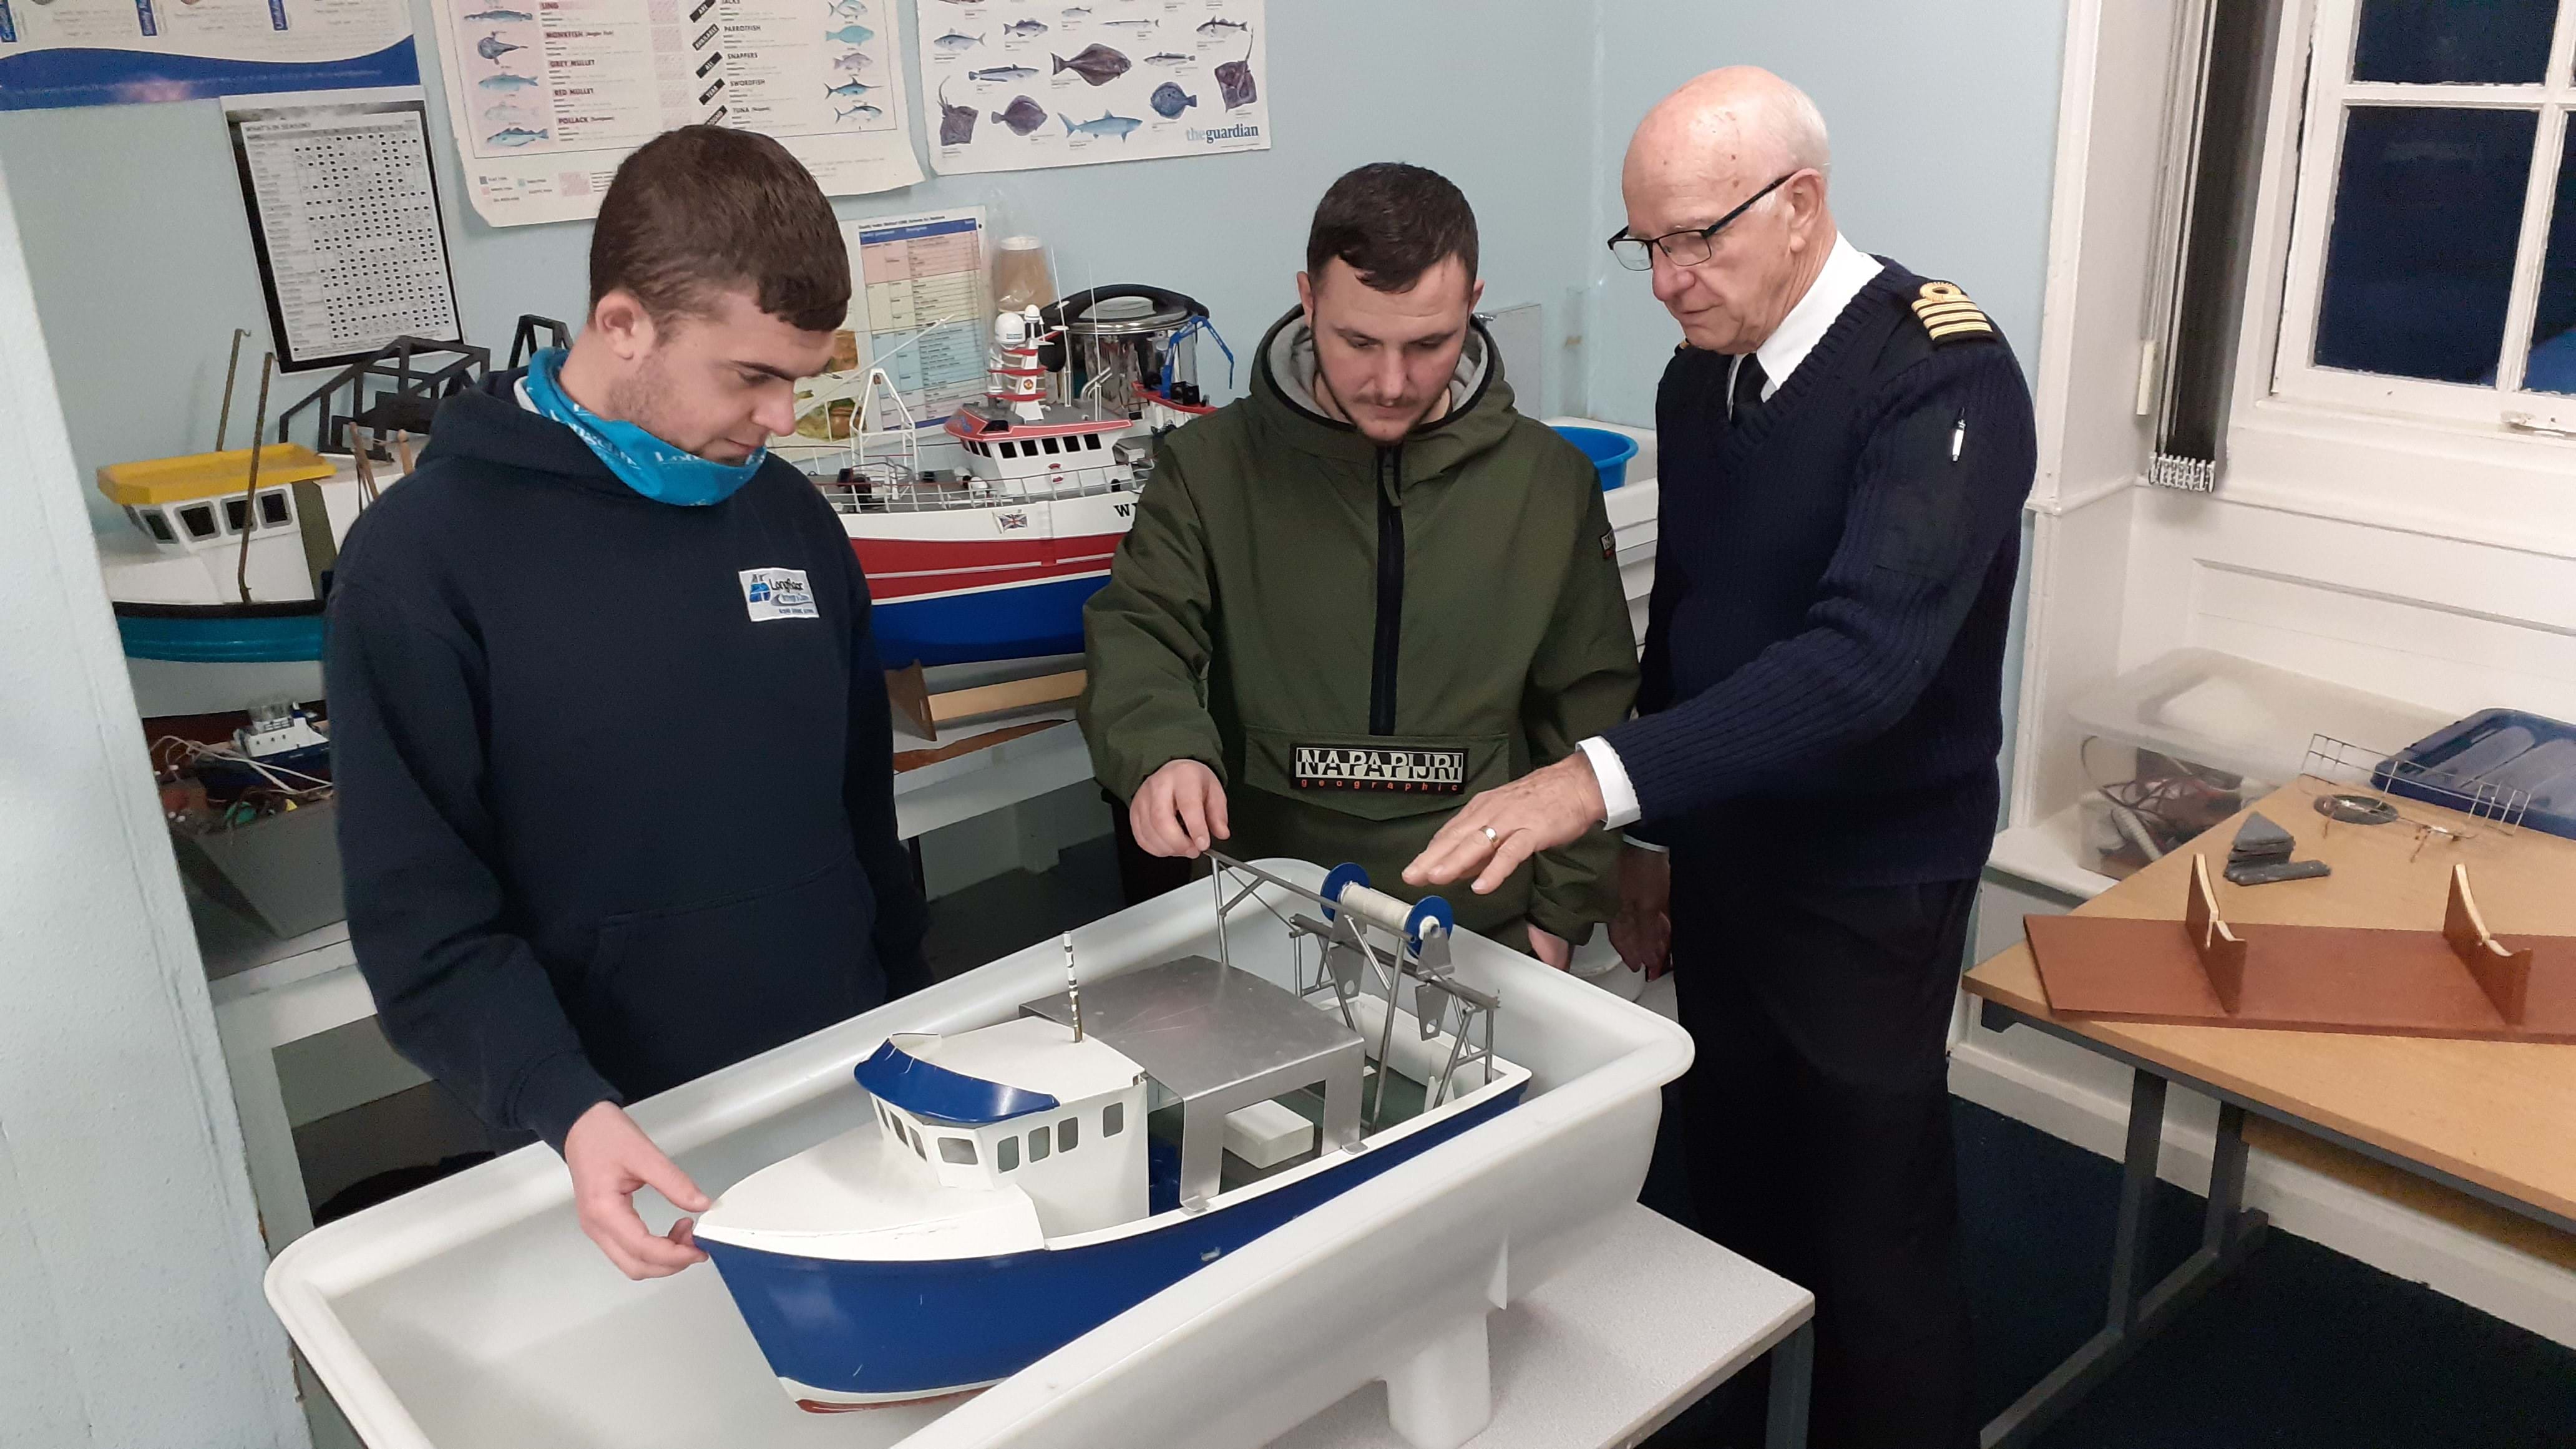 Photo shows two men being shown a model fishing vessel by a trainer in a classroom.